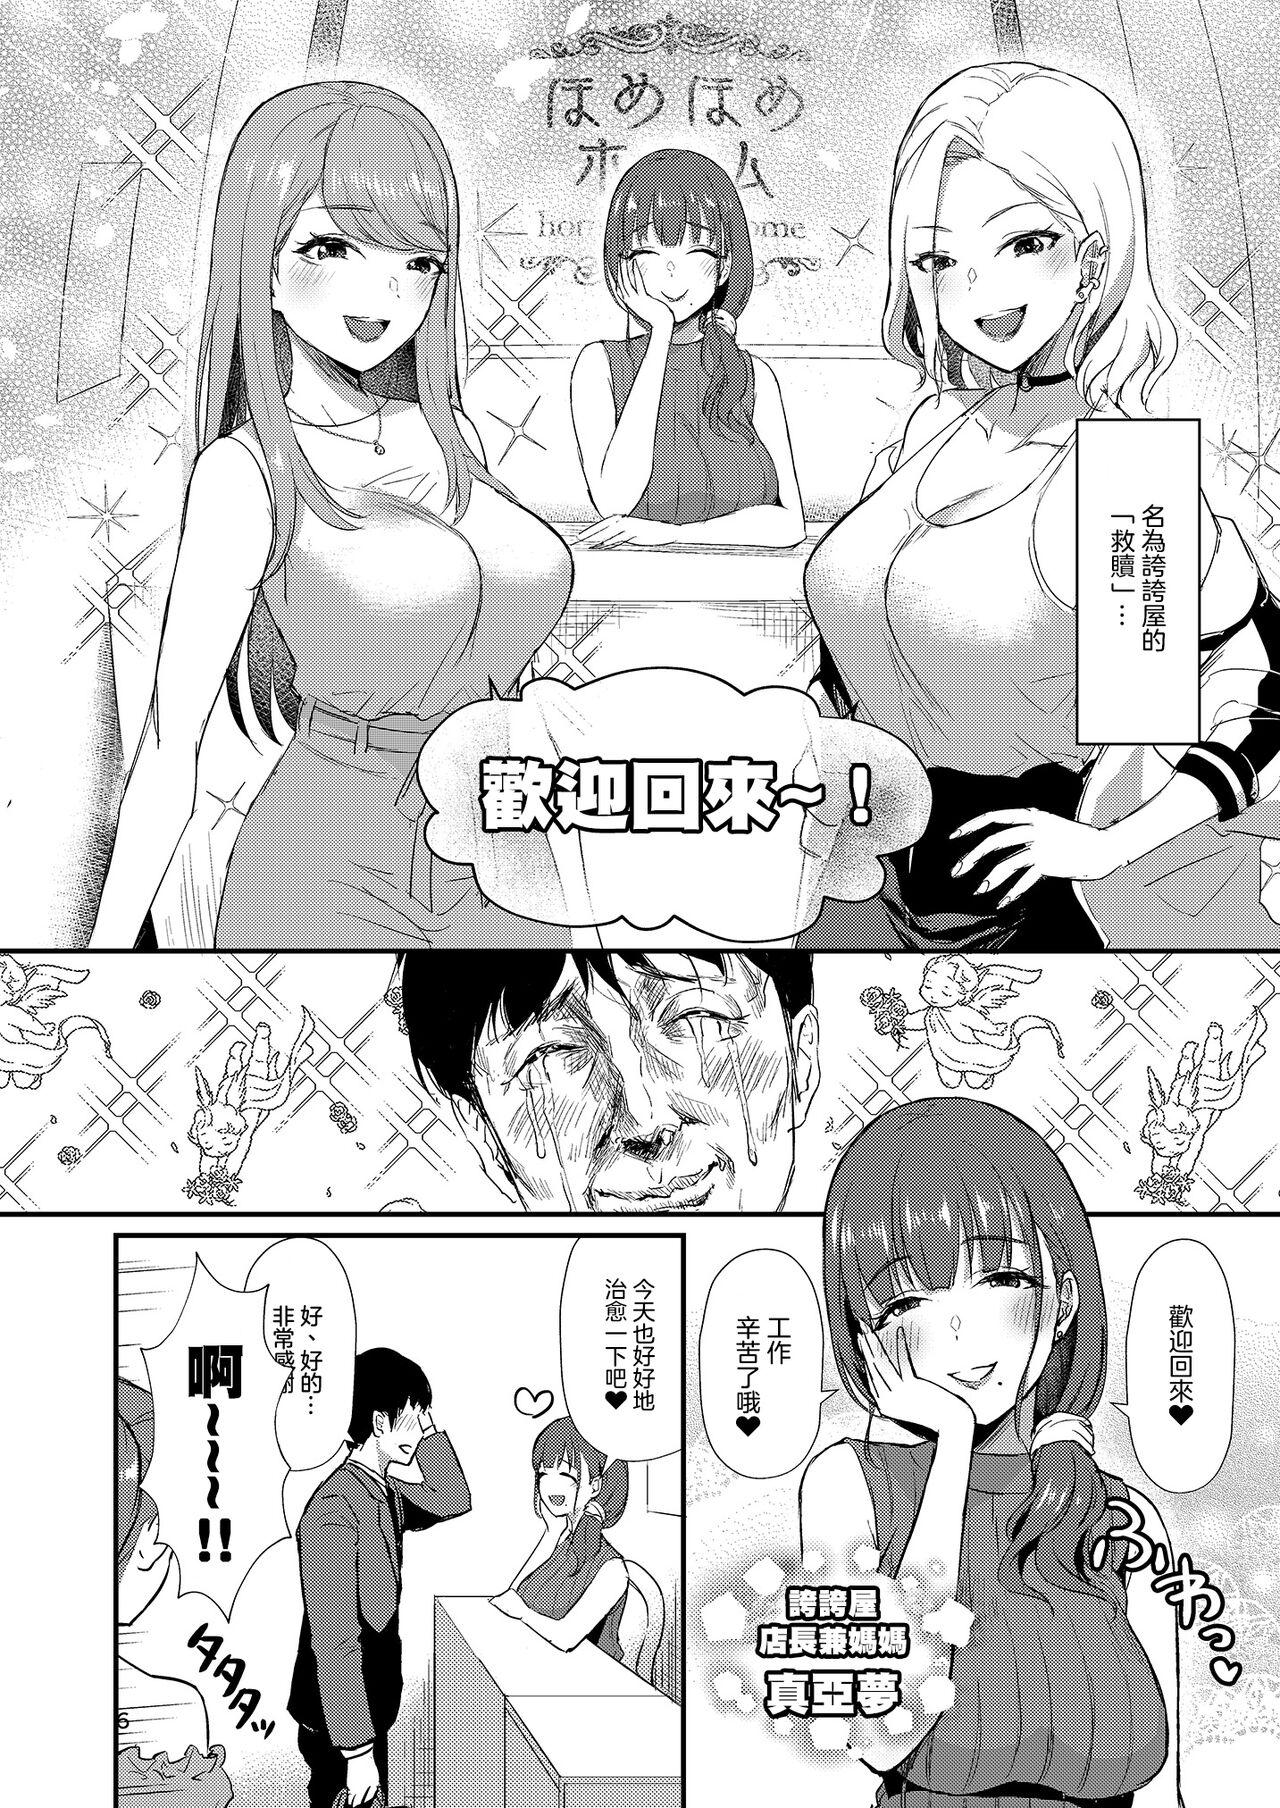 Behind Homehome Home e Youkoso! - Welcome to Home Home Home! | 歡迎來到誇誇屋！ Free Fucking - Page 7